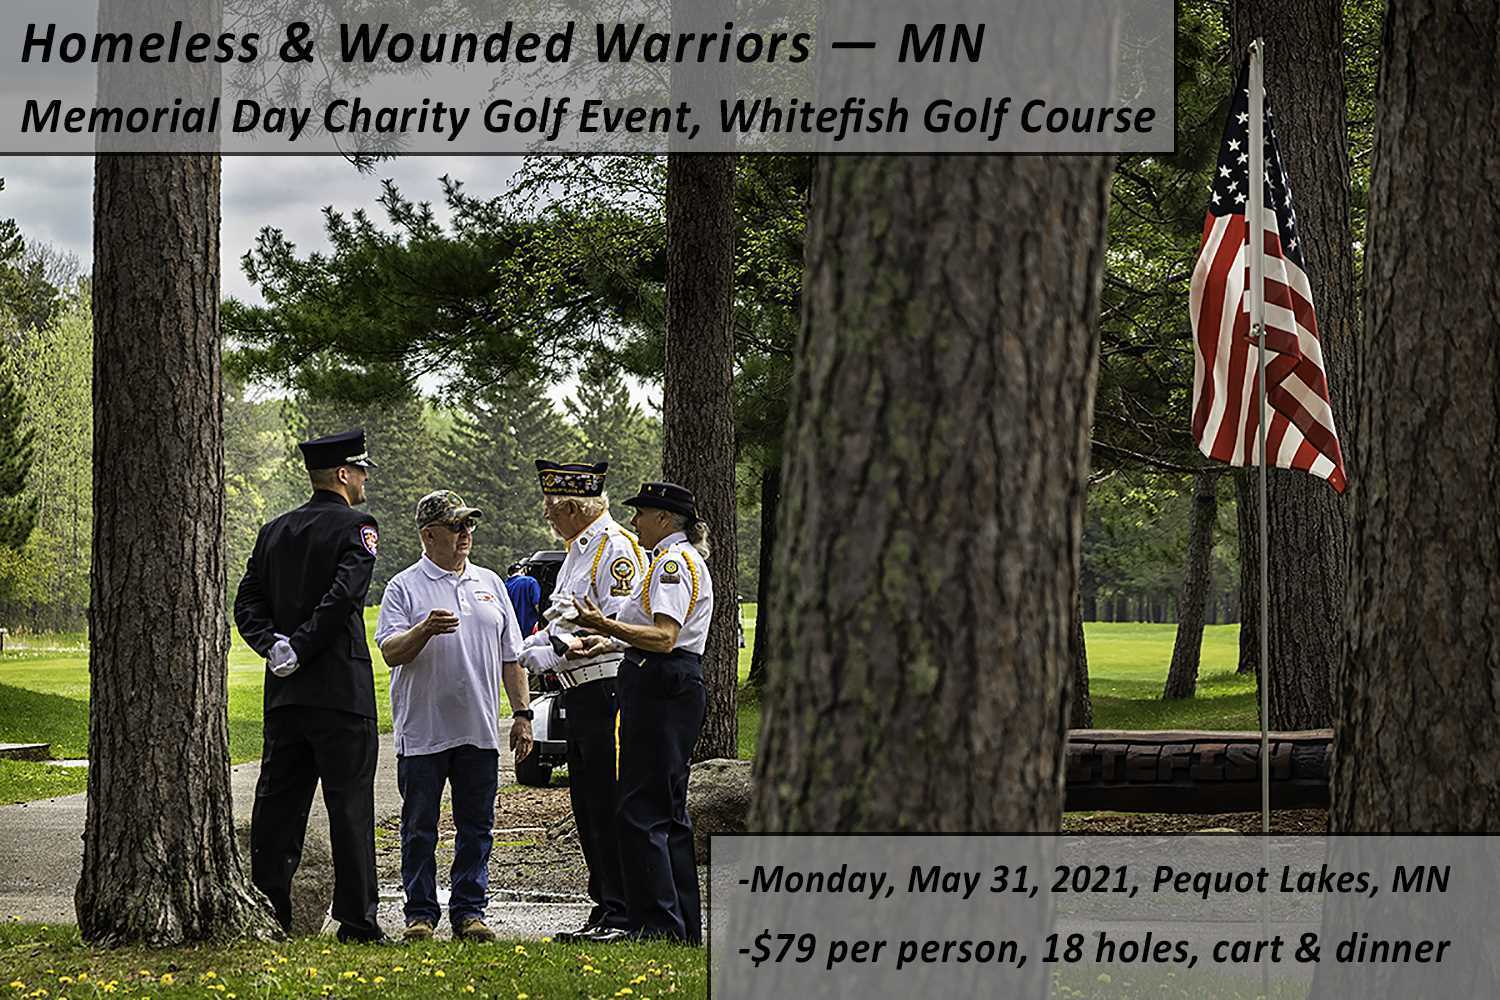 Annual Homeless and Wounded Warriors golf tourney set